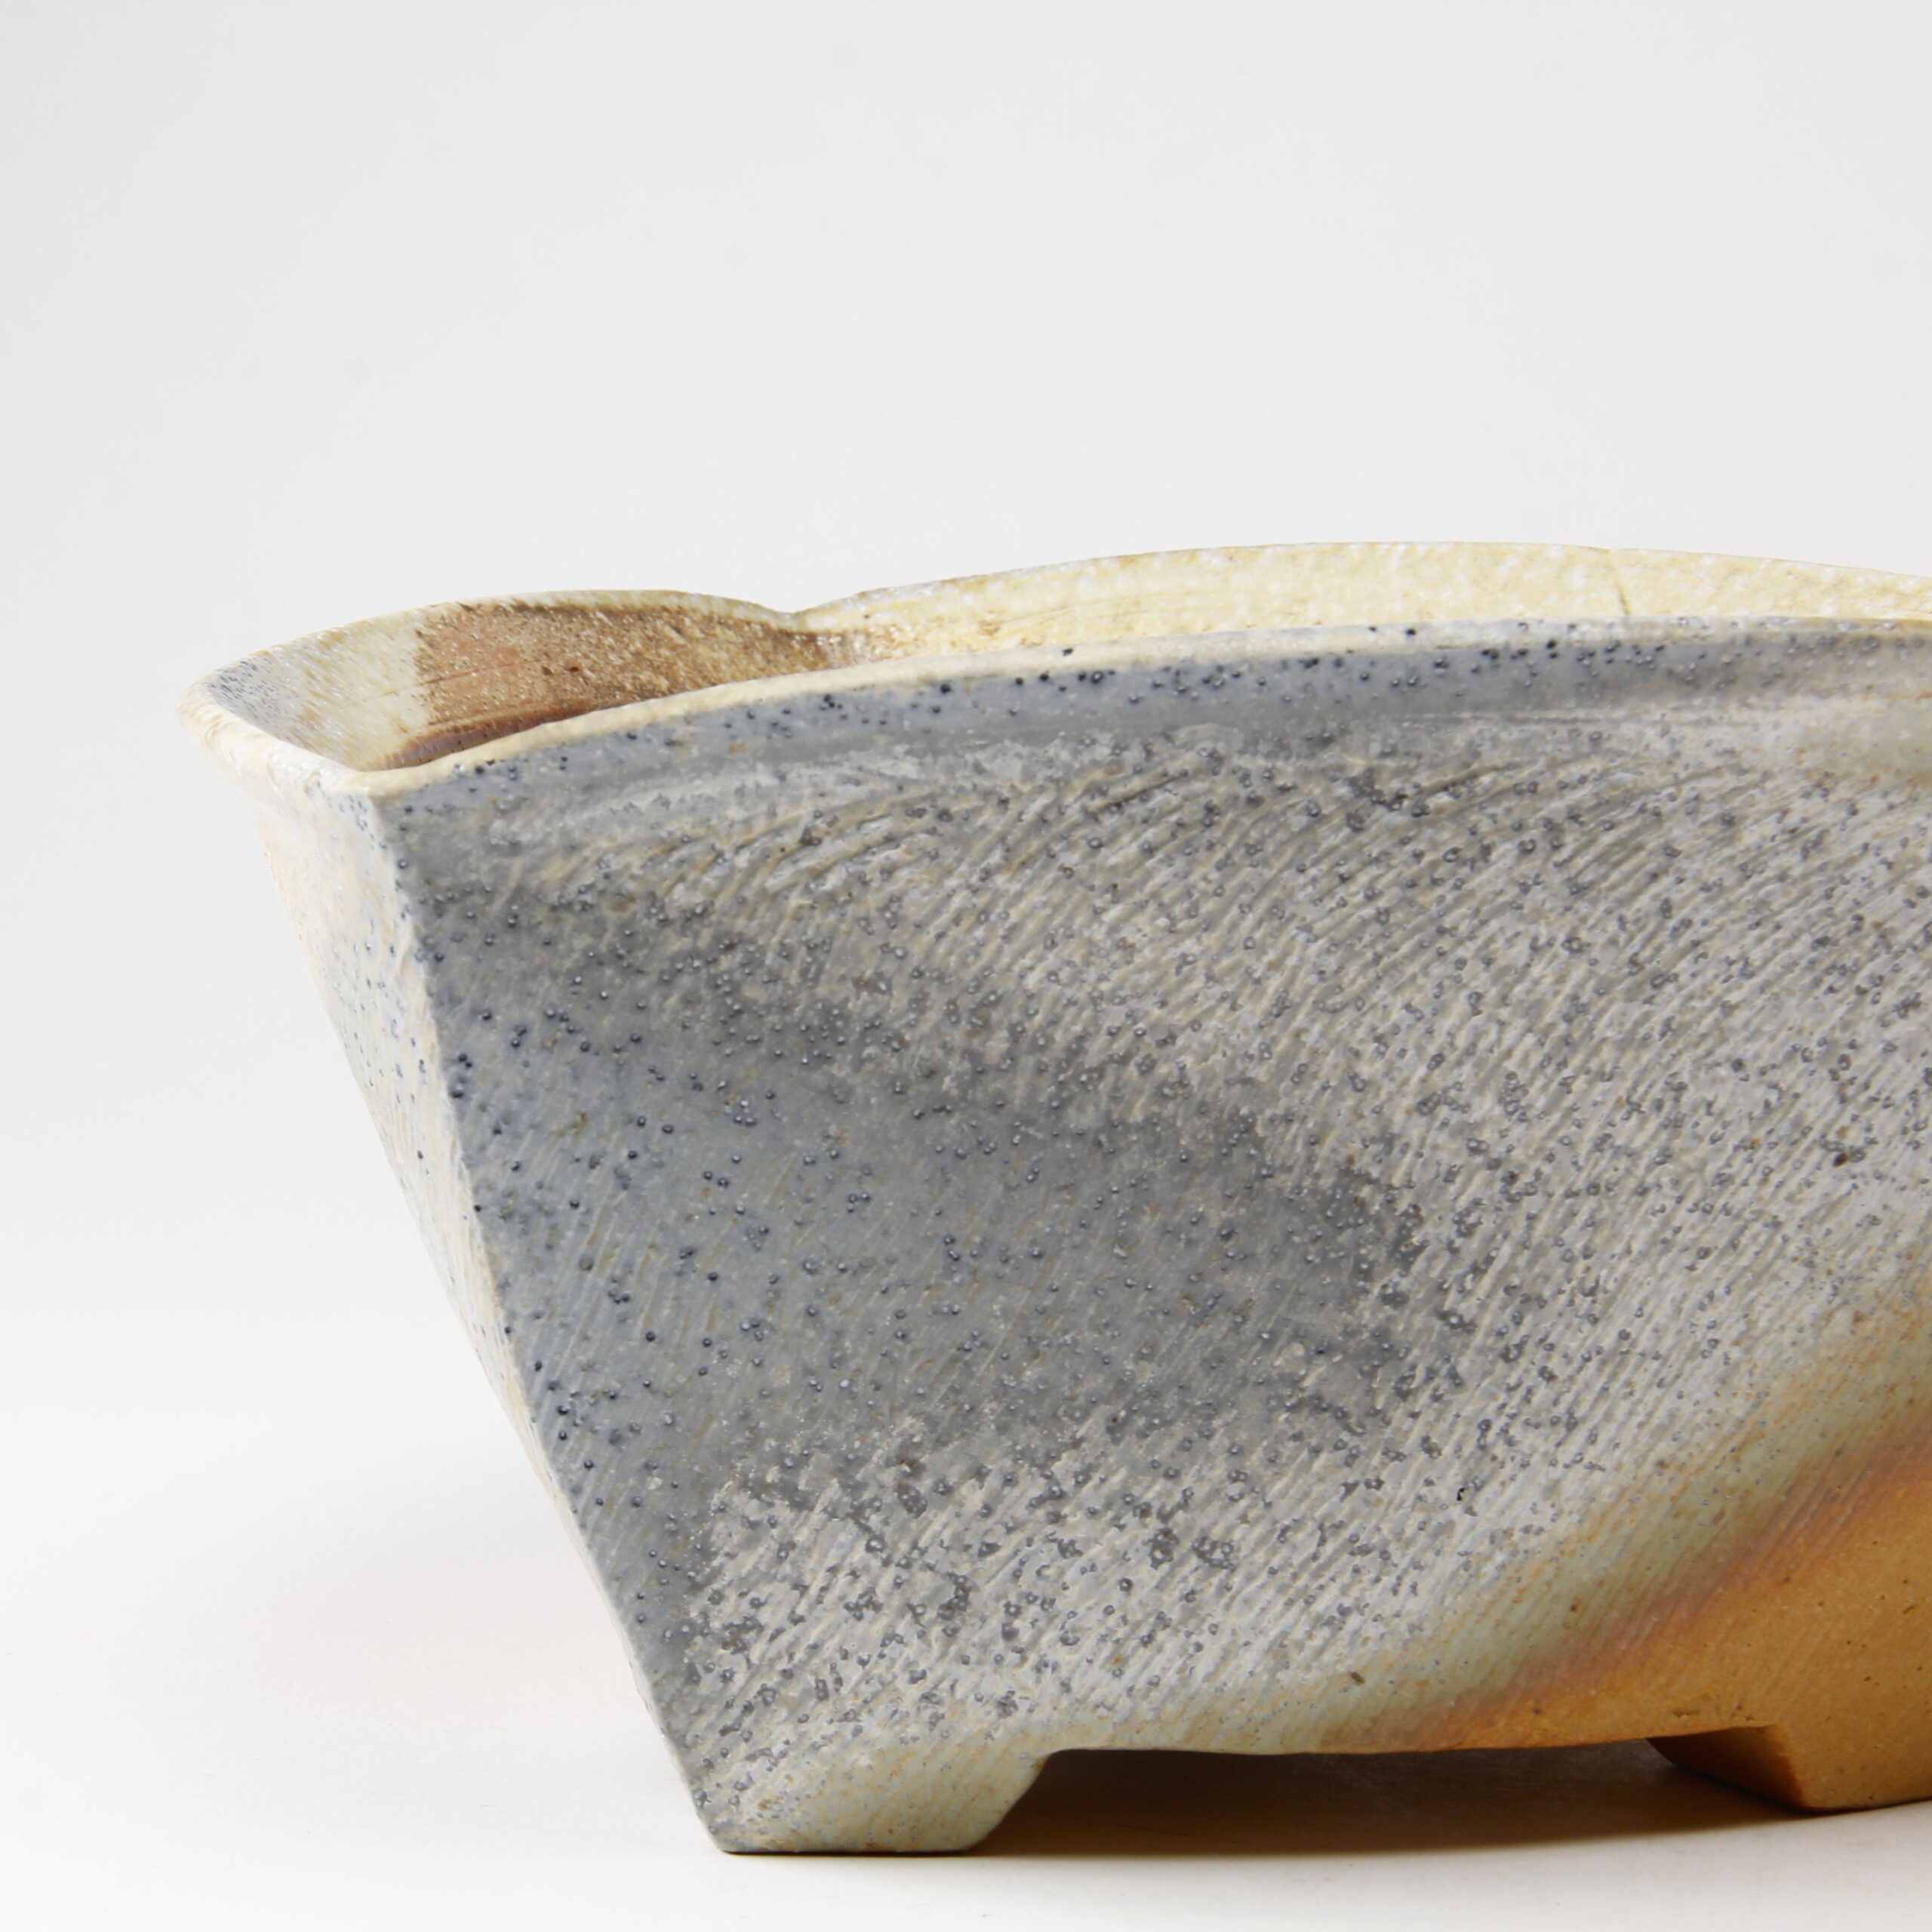 Bruce Cochrane: Triangle Bowl Product Image 3 of 4